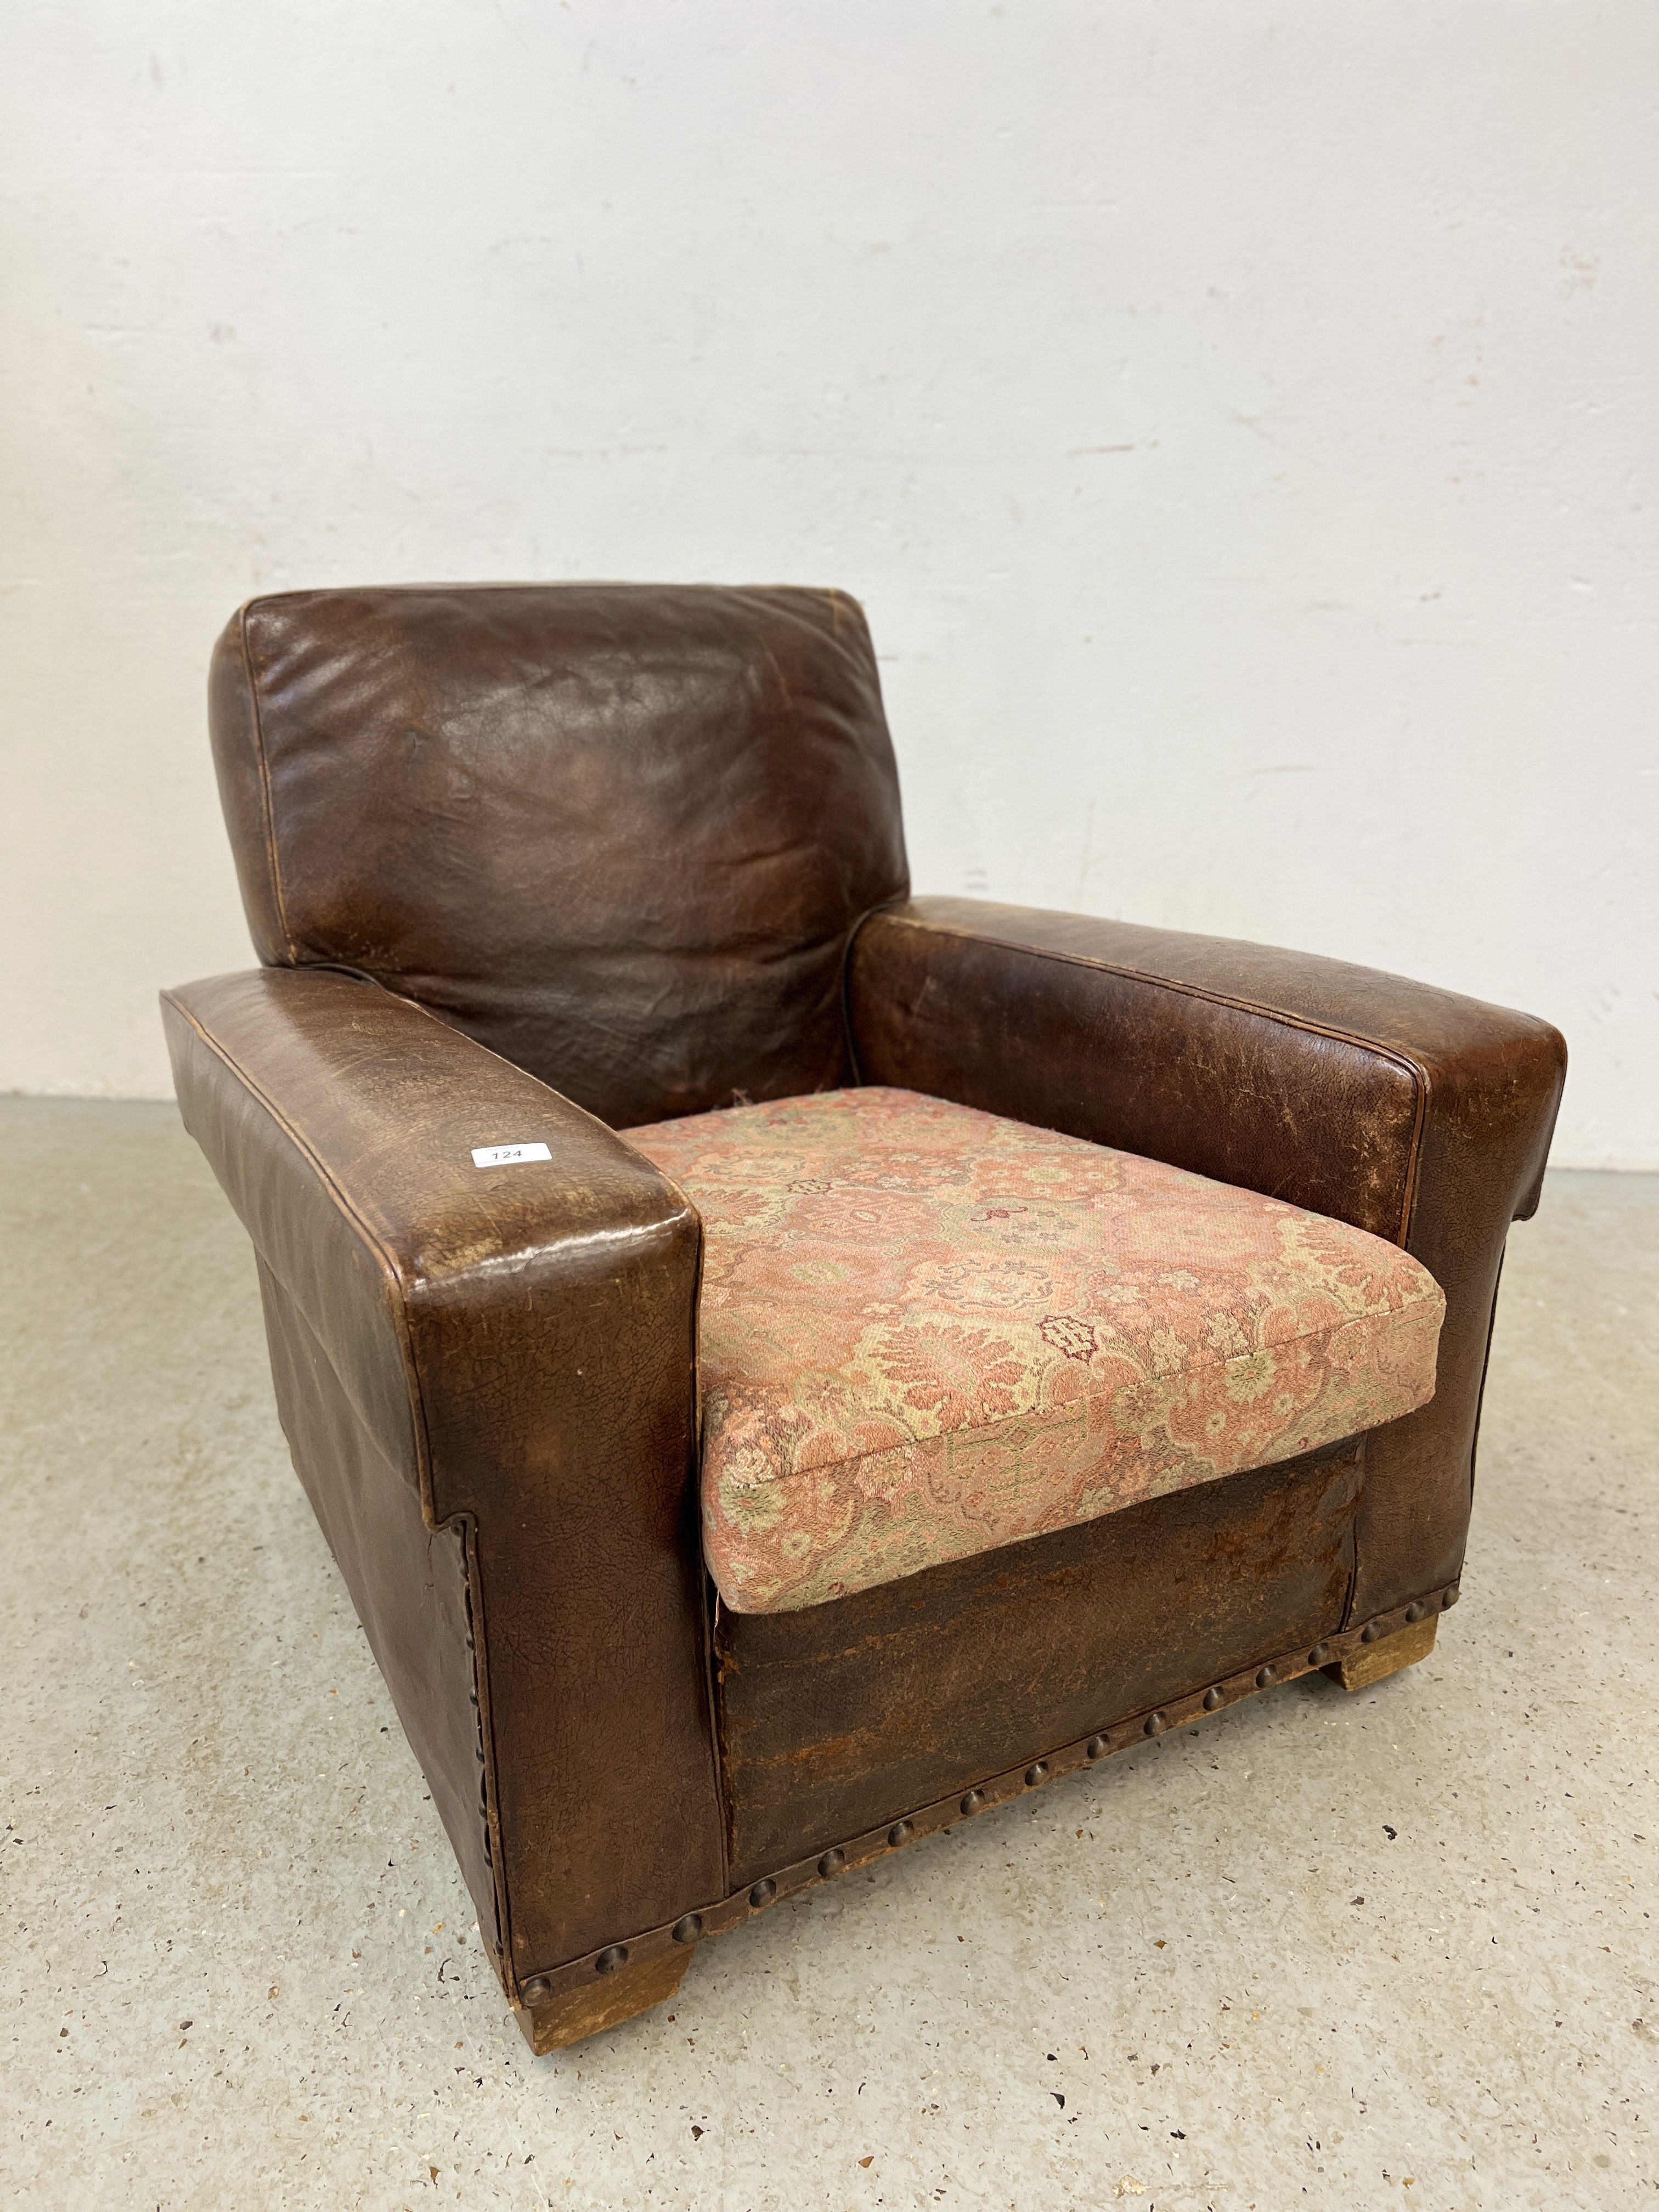 A 1930'S BROWN LEATHER CLUB CHAIR WITH STUDDED DETAIL H 78CM X W 83CM X D 87CM.